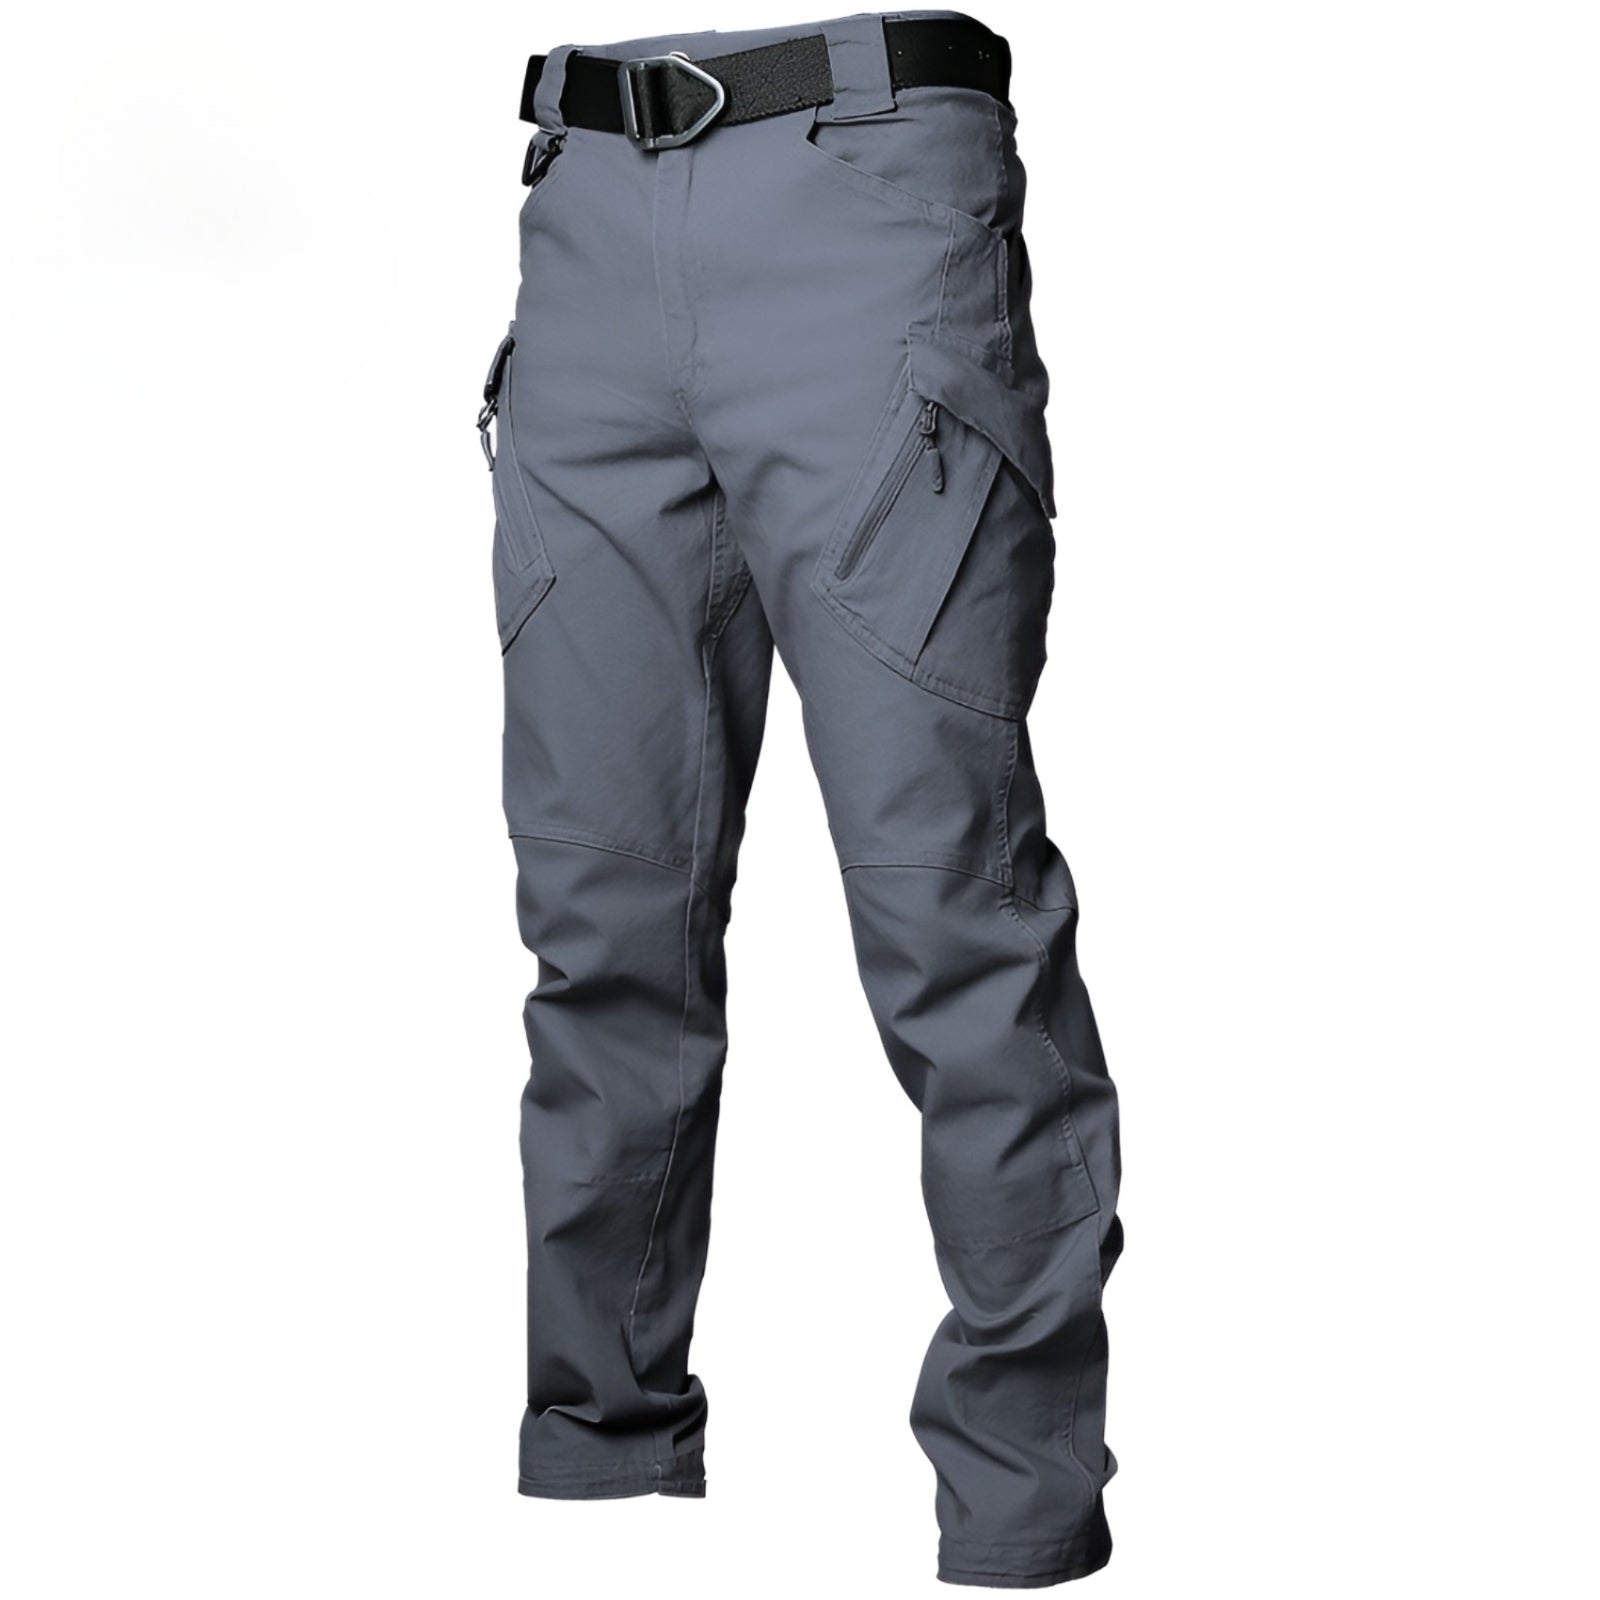 Military Tactical Pants For Men Black Multi Pocket Work Clothes For Combat,  Police, And Casual Wear W0325 From Mengyang04, $23.12 | DHgate.Com